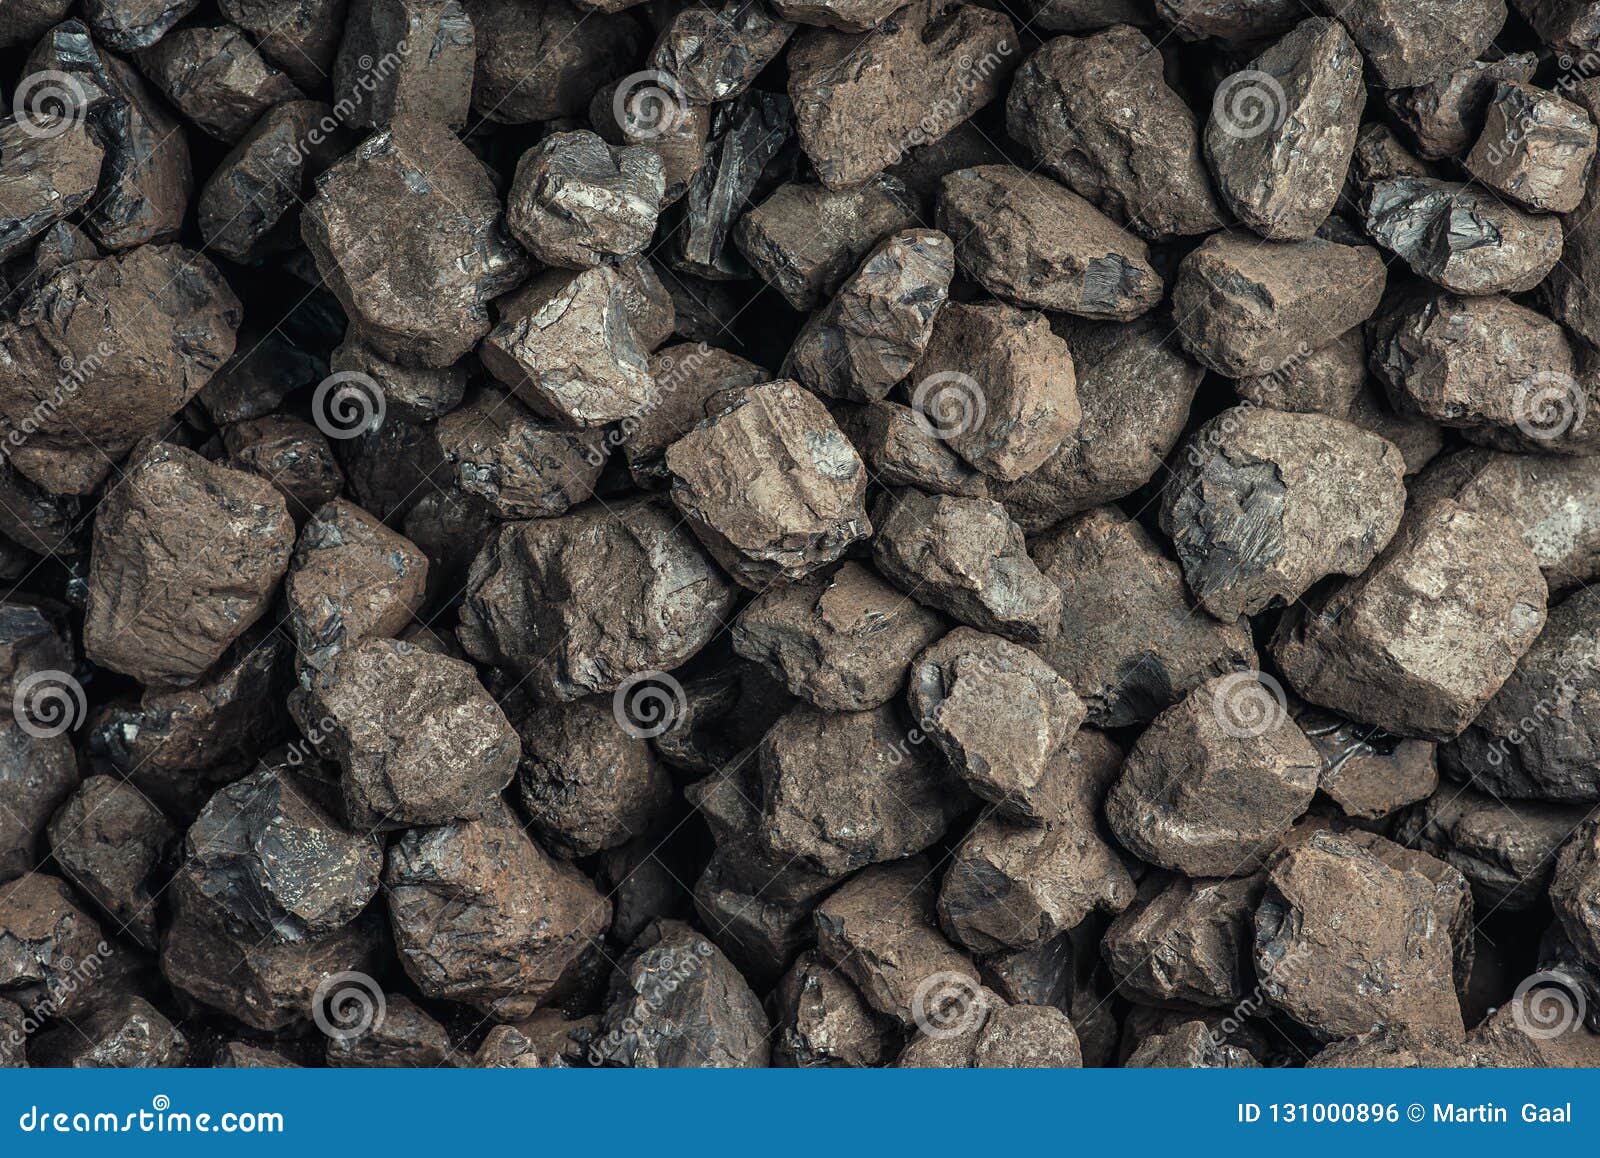 Coal, Heavy Industry, Heating, Mineral Resources Stock Photo - Image of ...